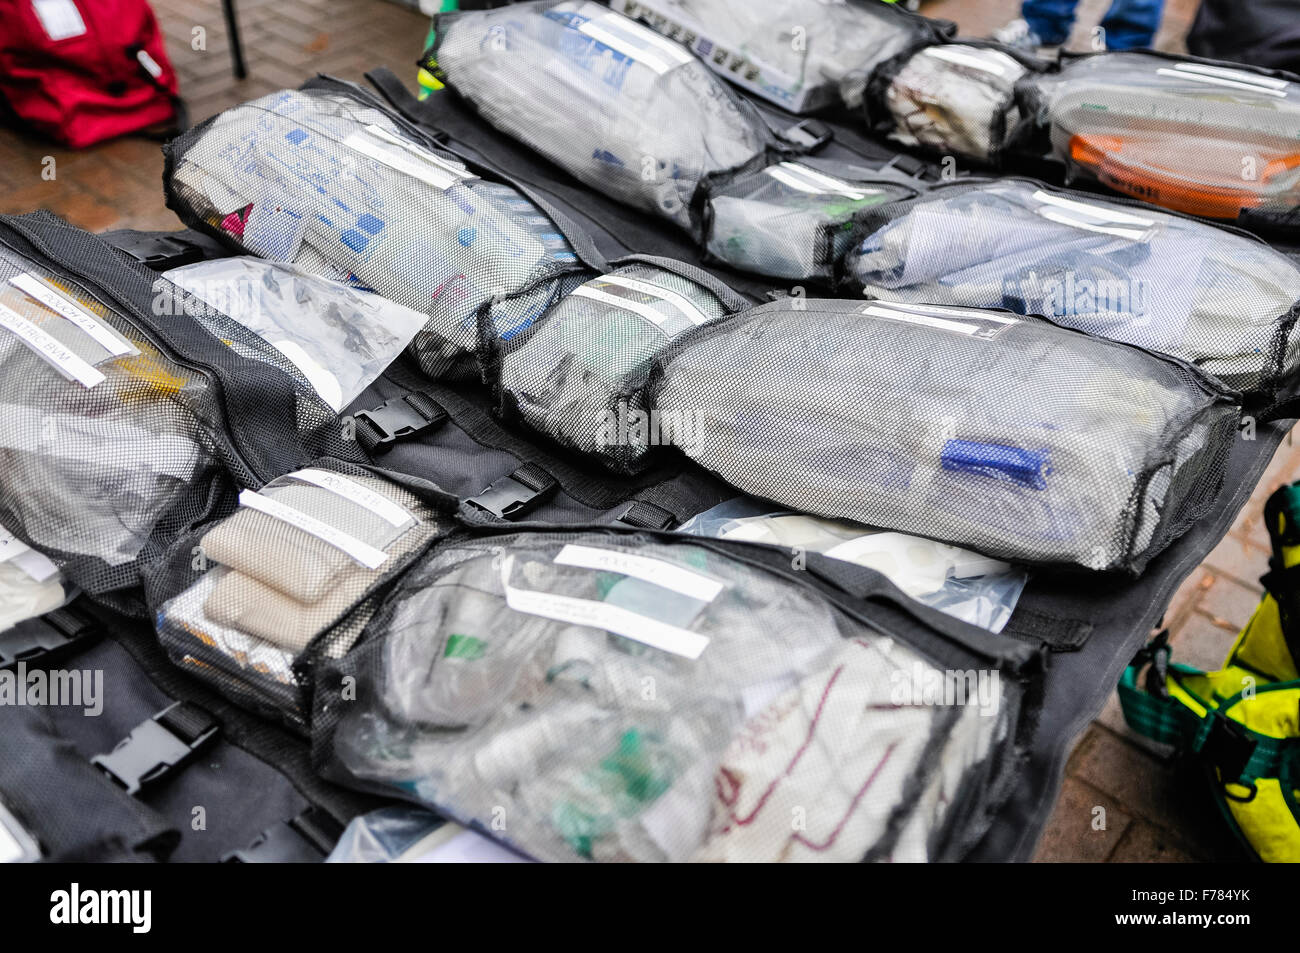 Northern Ireland. 26th November, 2015. An emergency medical supply pouch roll for dealing with large-scale chemical, biological and nuclear incidents Credit:  Stephen Barnes/Alamy Live News Stock Photo